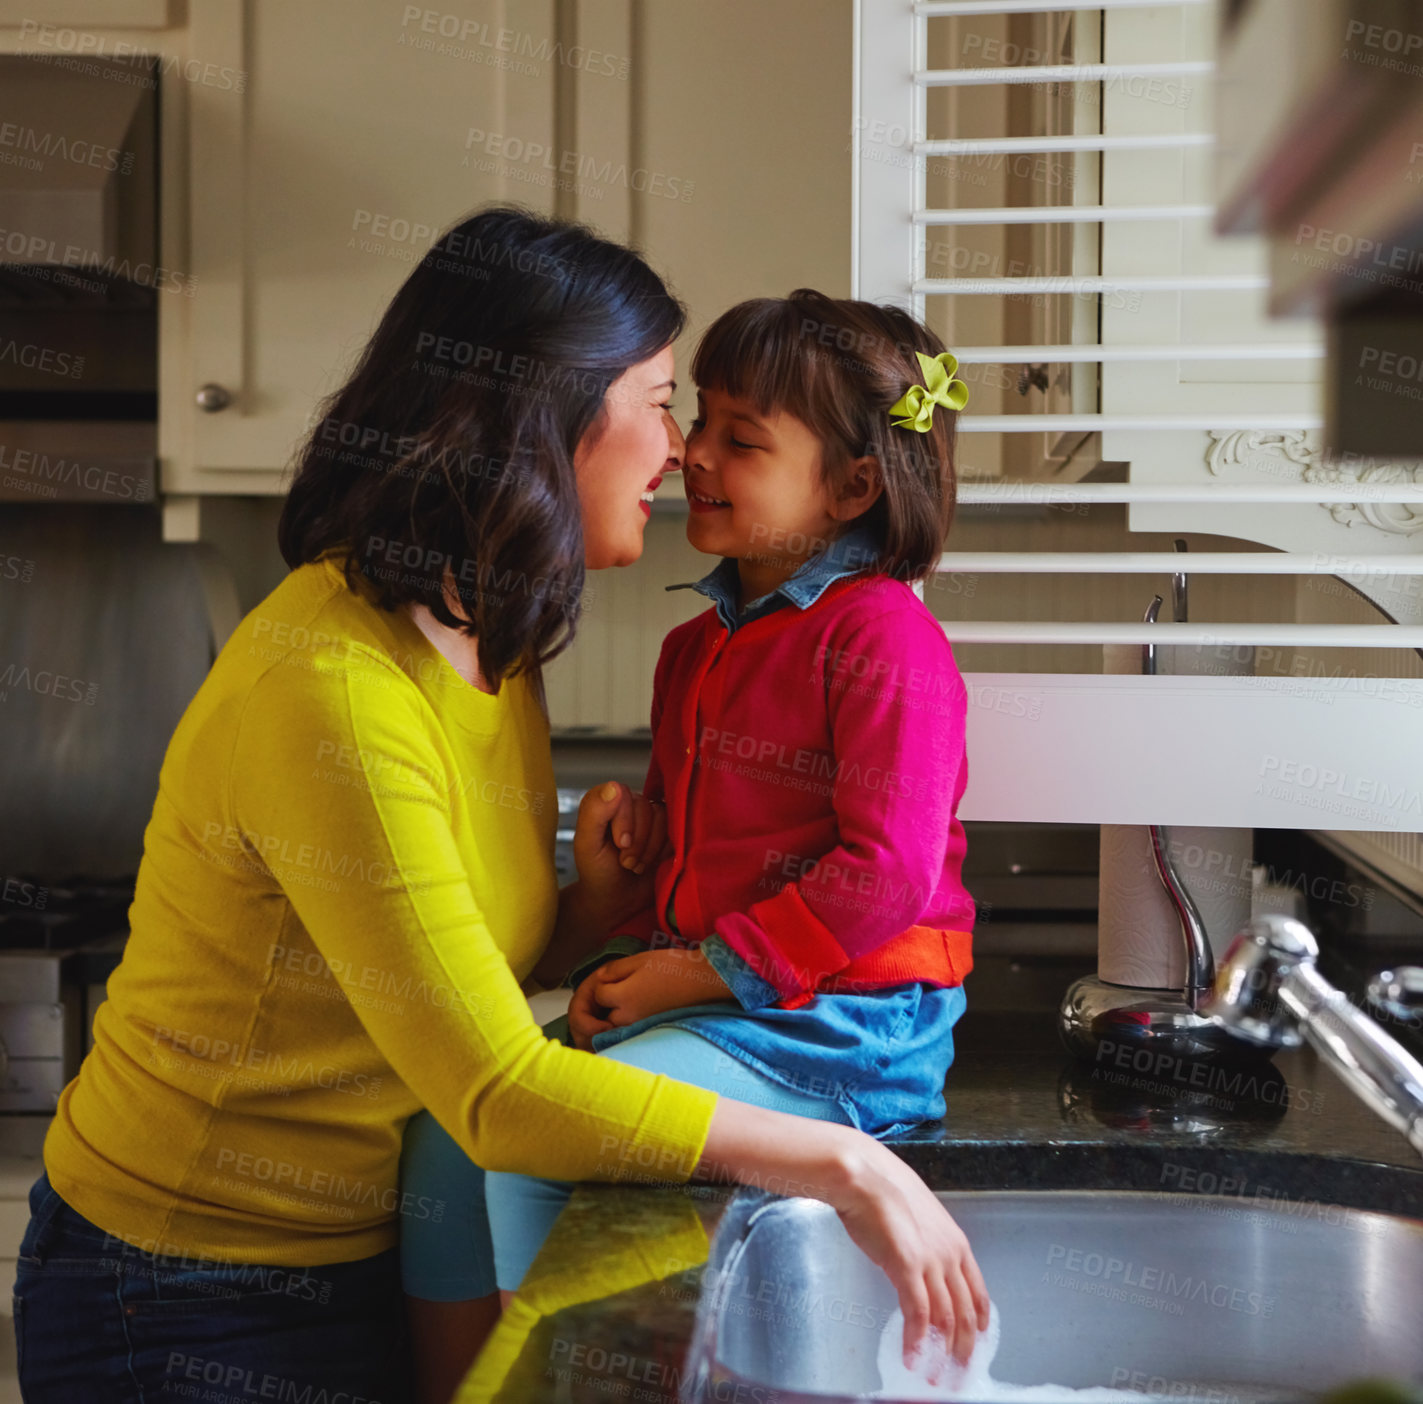 Buy stock photo Shot of a young mother and her daughter bonding by the kitchen sink